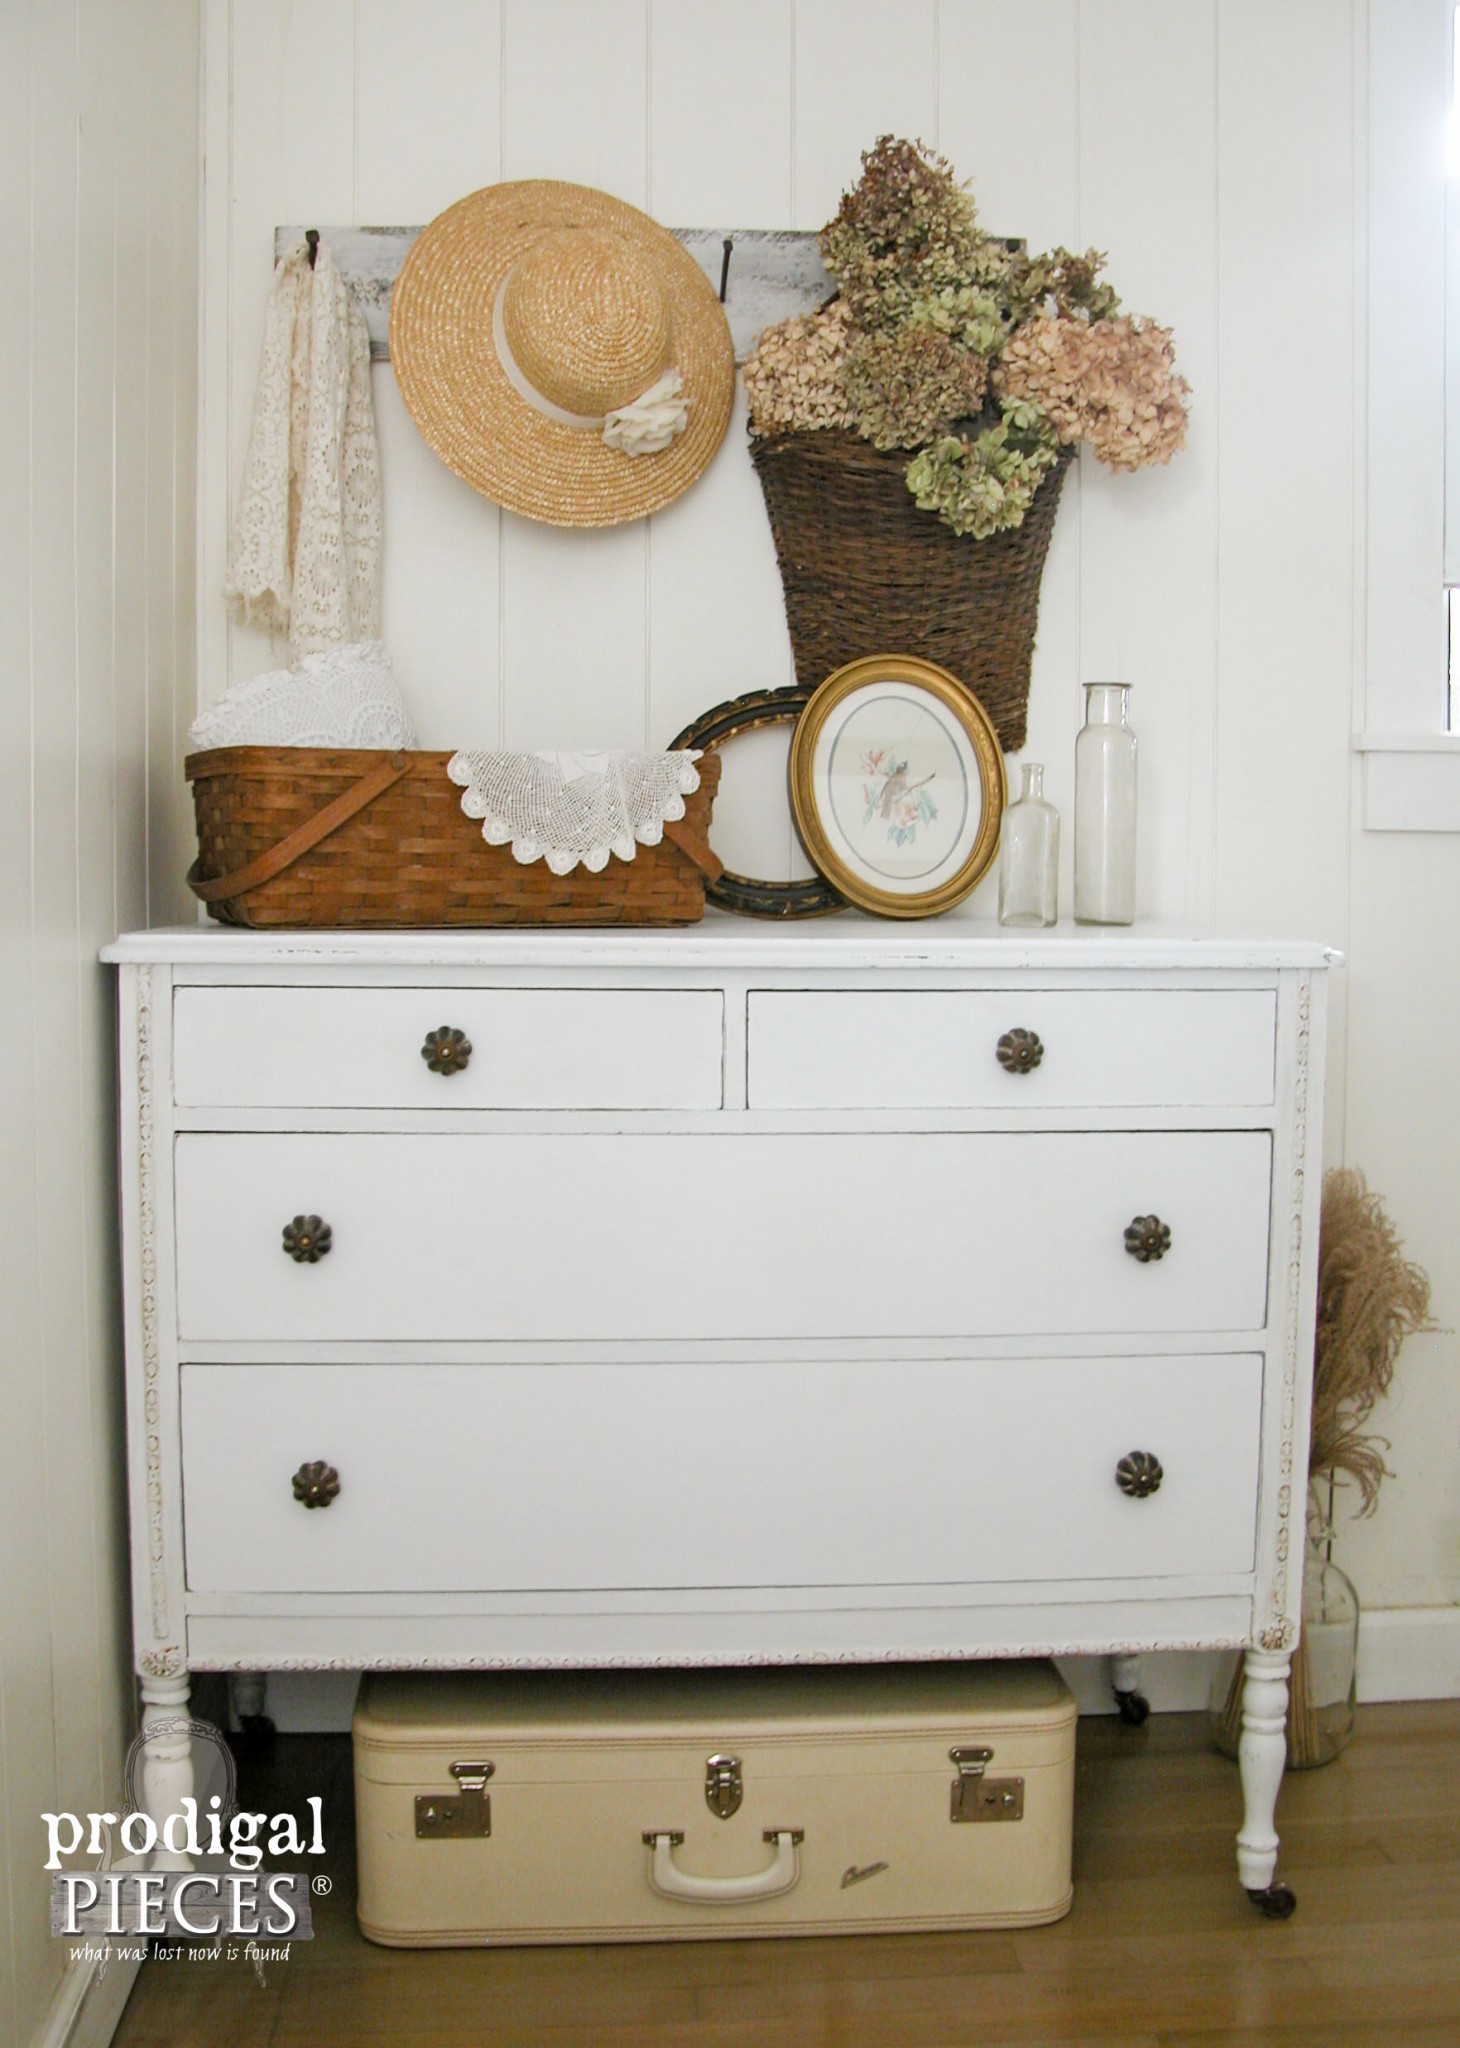 This white dresser is classic and timeless in design.